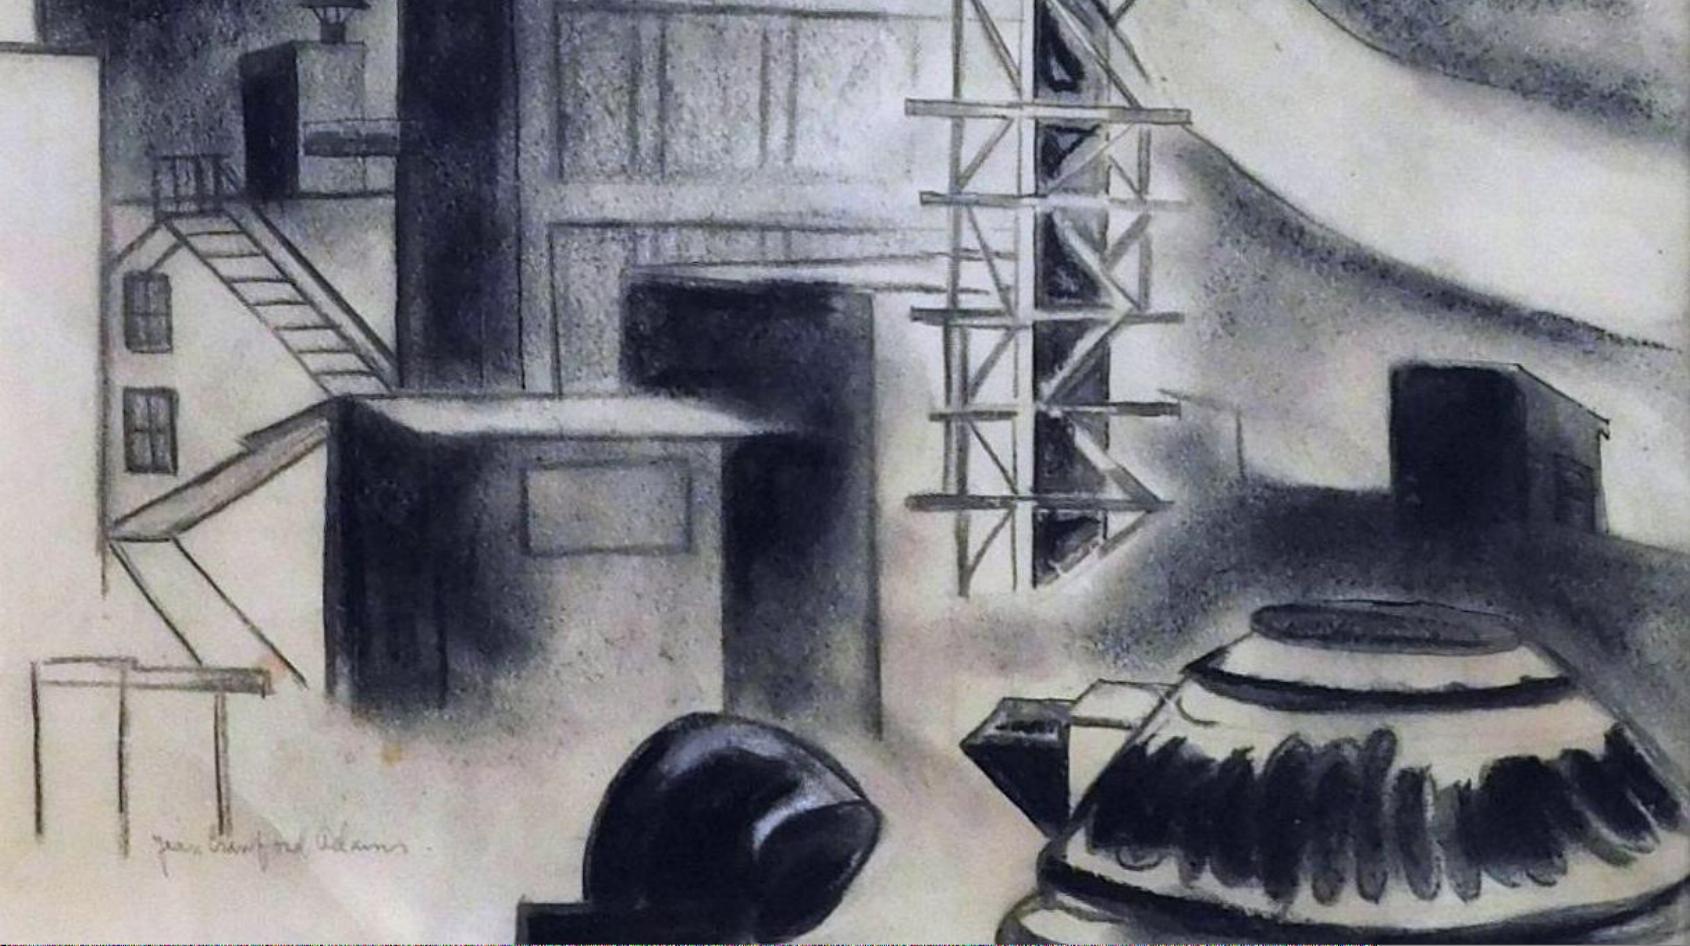 Paper Jean Crawford Adams Original Drawing Chicago, circa 1930. “View from the Studio” For Sale